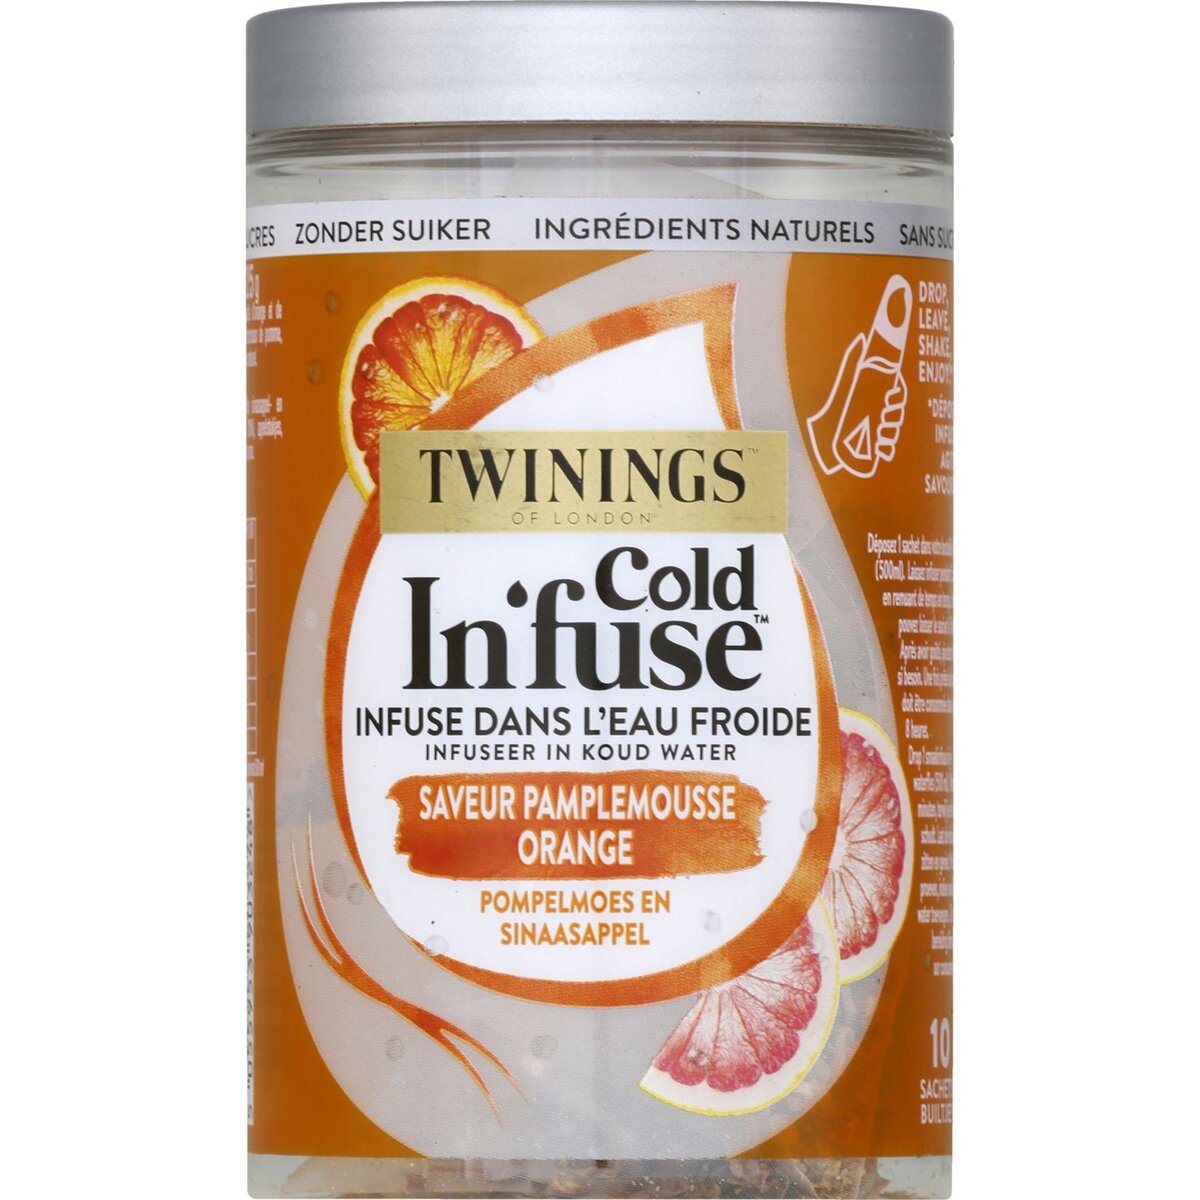 TWININGS Cold In'fuse infusion froide saveur pamplemousse orange 10 sachets 250g